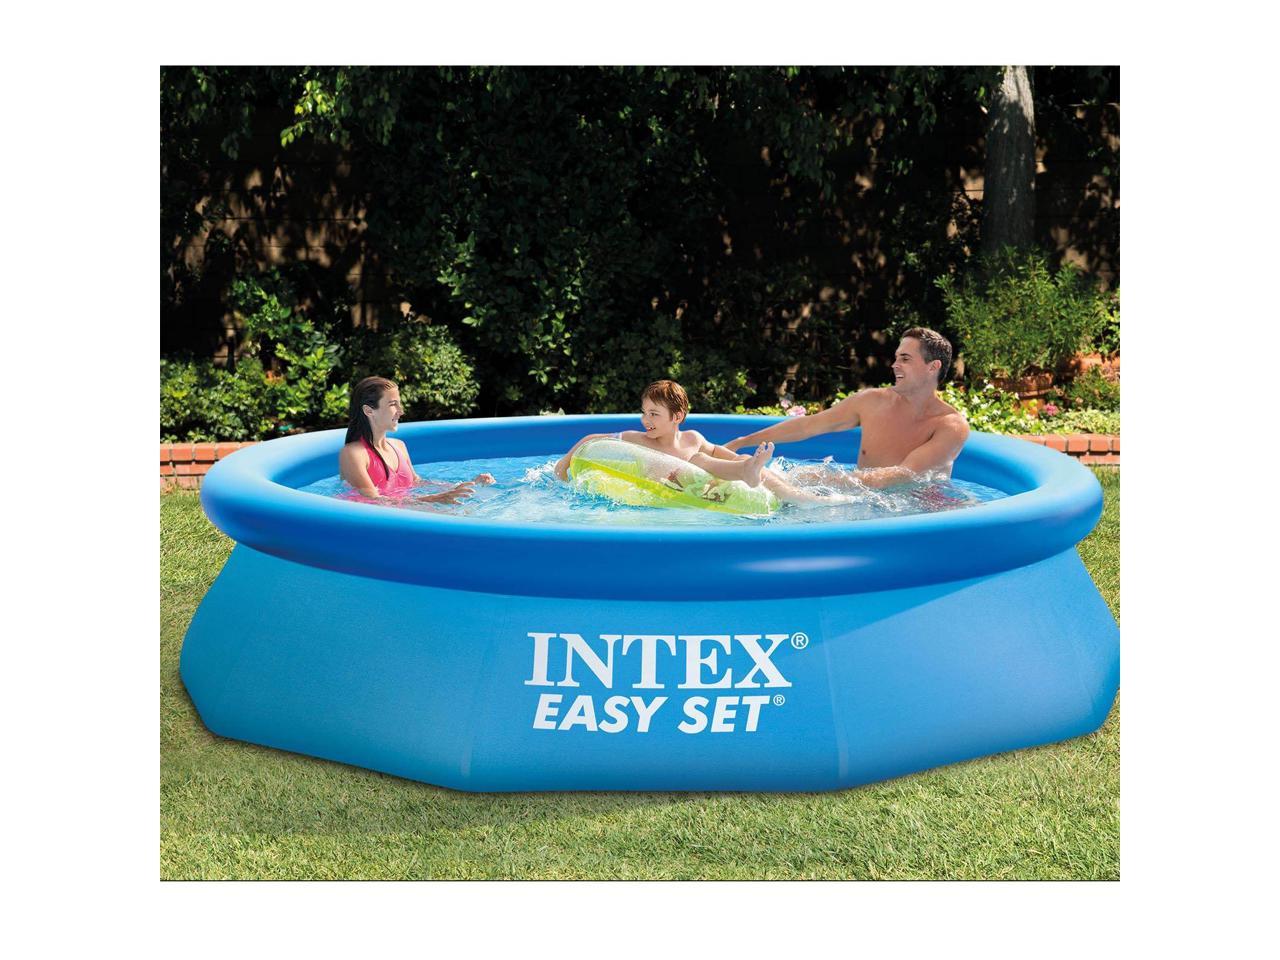 What To Clean Interior Of Intex Easy Set Vinyl Pool With Before Filling With Water